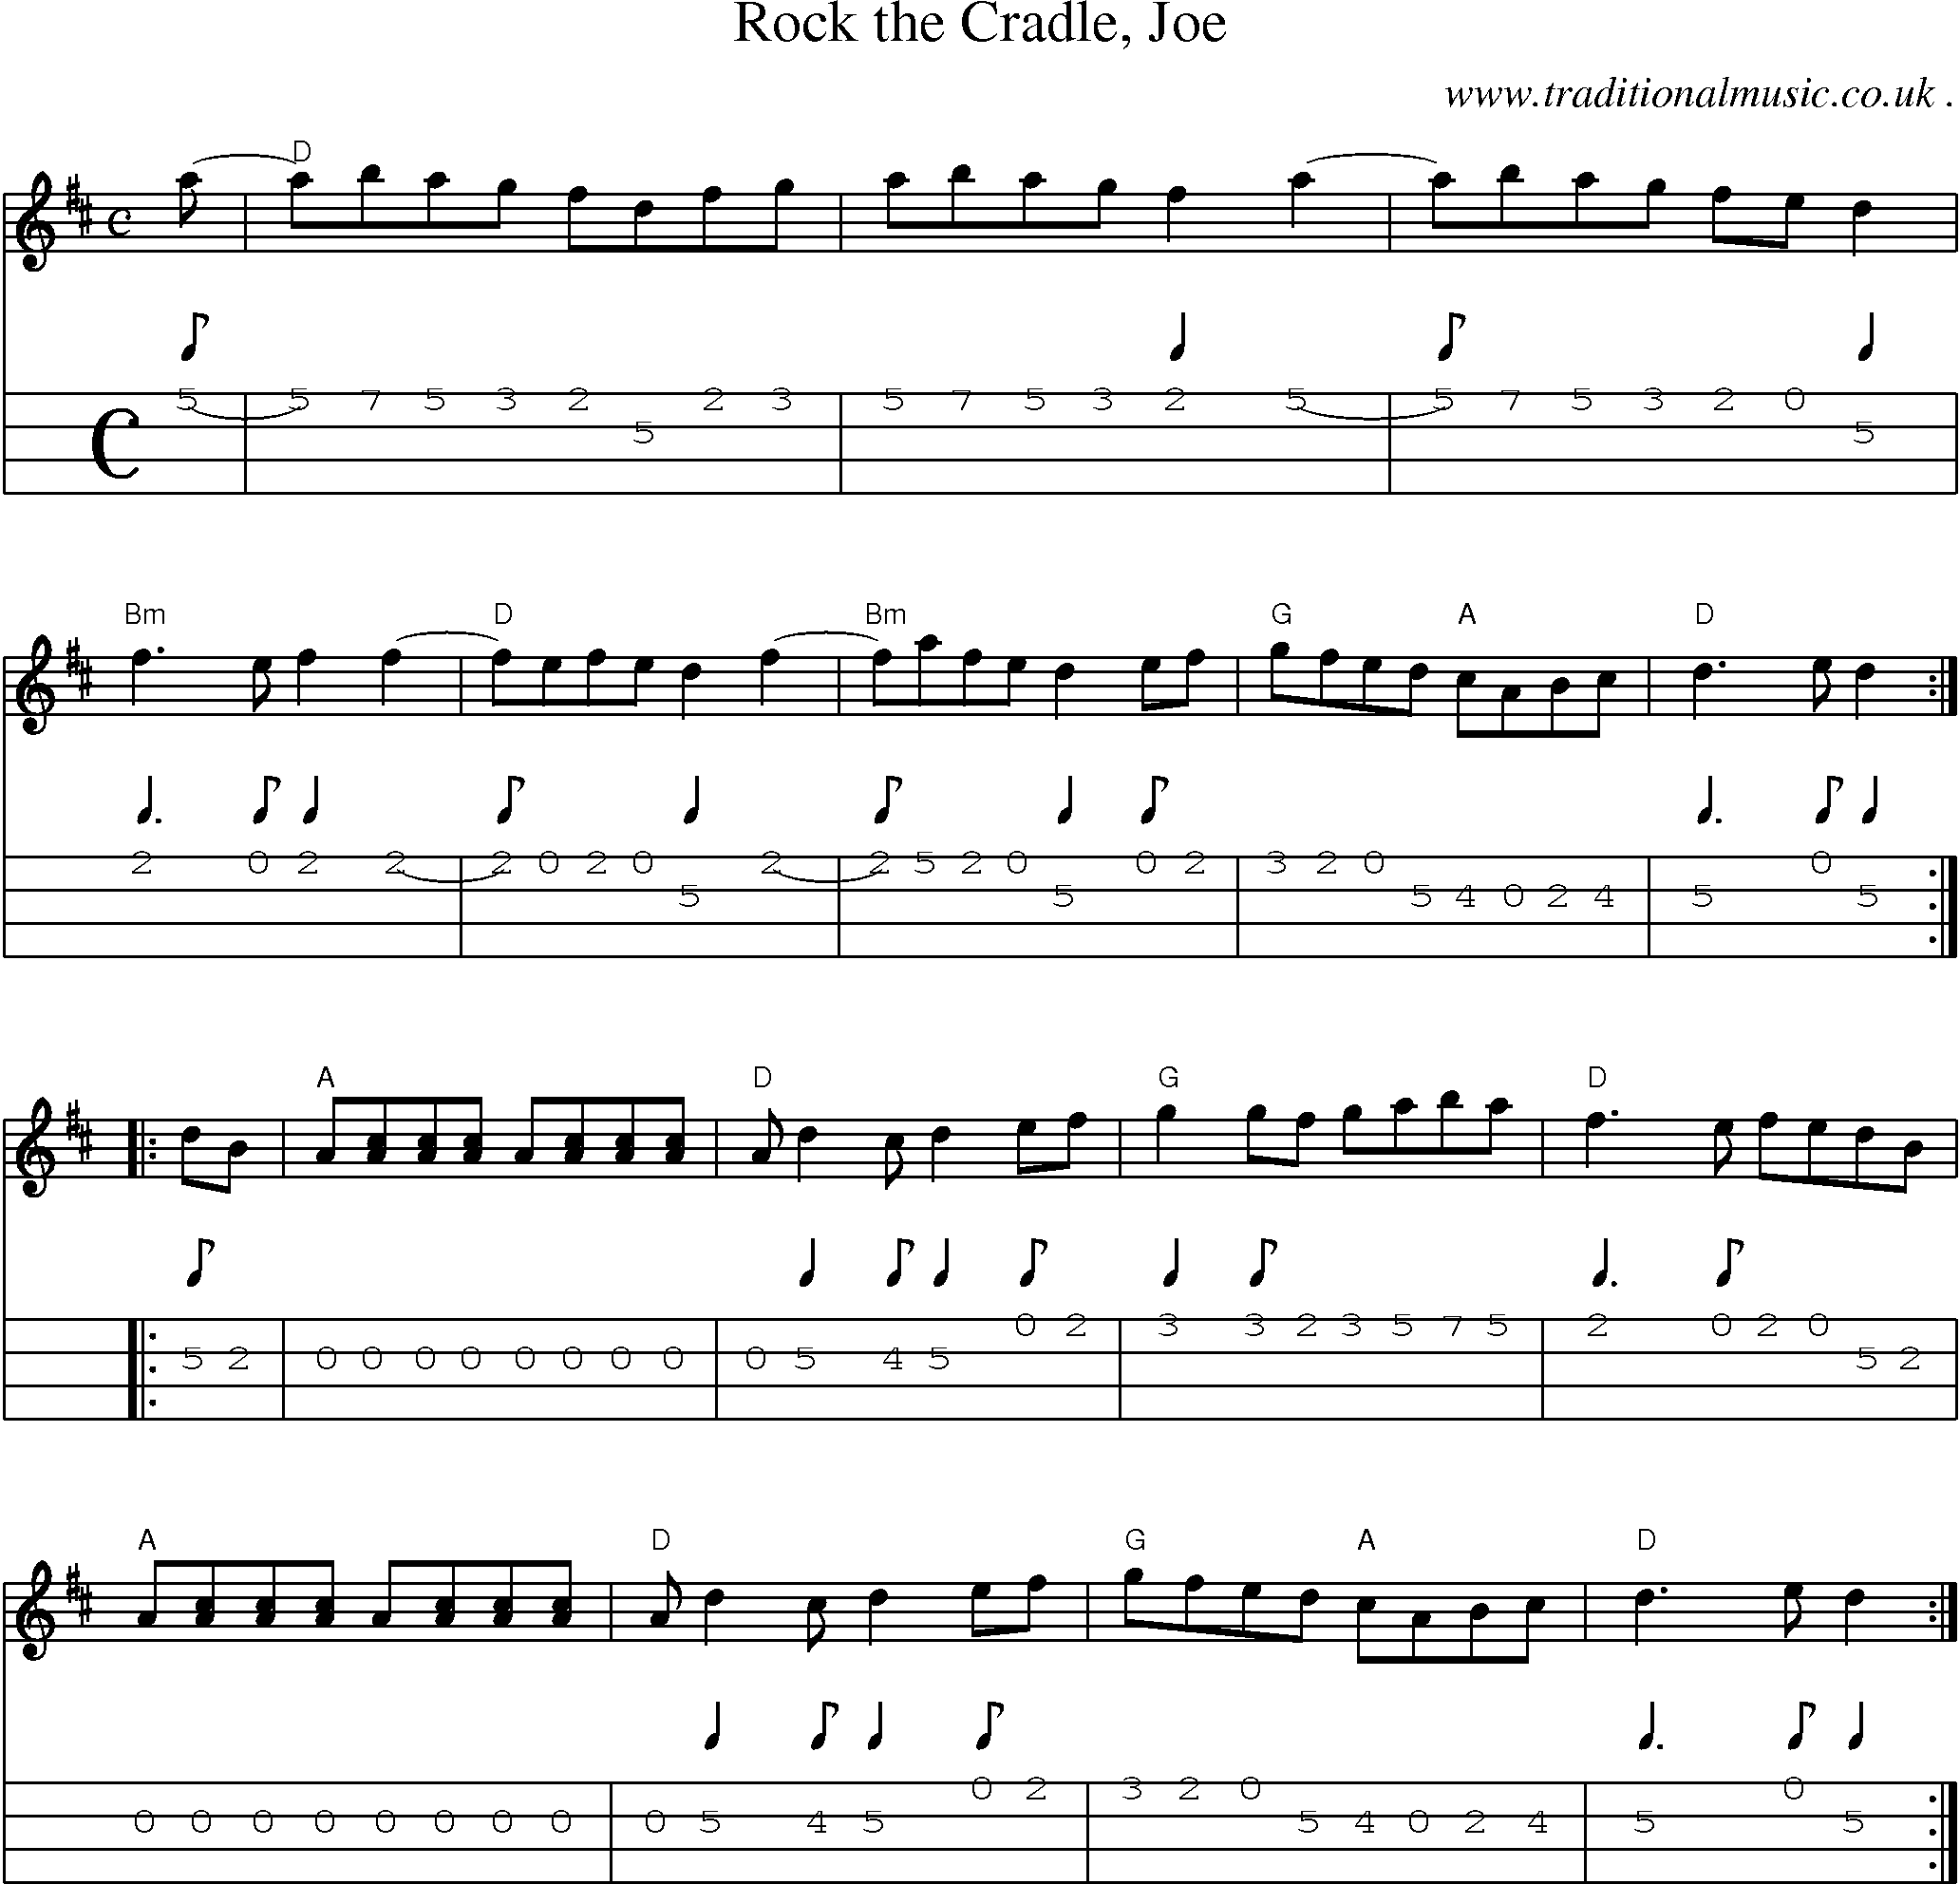 Music Score and Guitar Tabs for Rock The Cradle Joe1